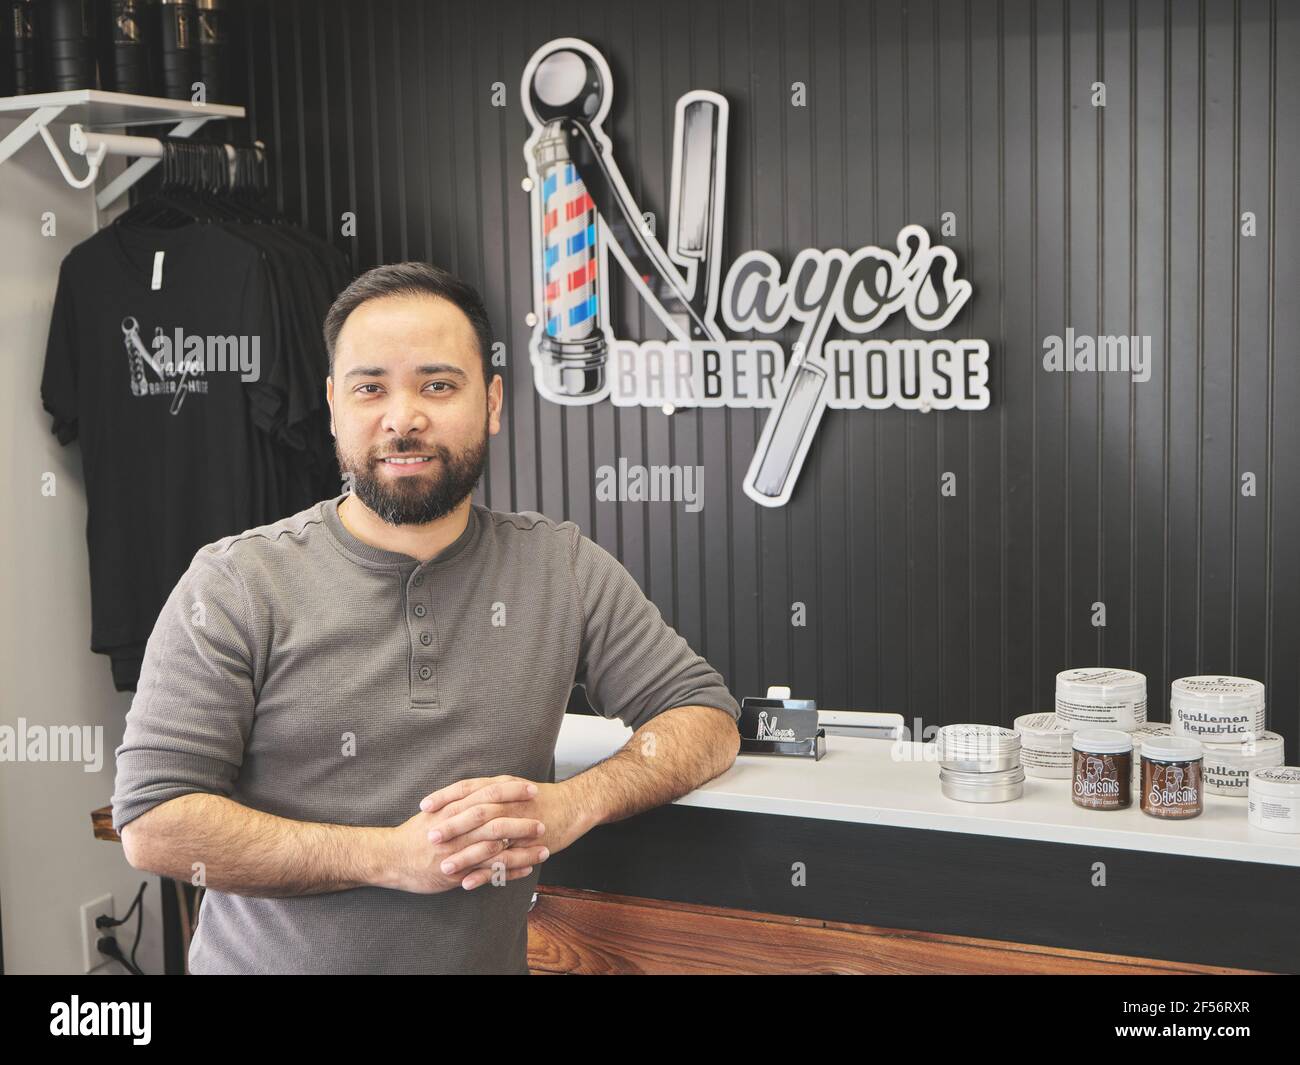 Hispanic Latino, entrepreneur male barber standing in front of his sign or logo in his minority owned barber shop in Pike Road Alabama, USA. Stock Photo